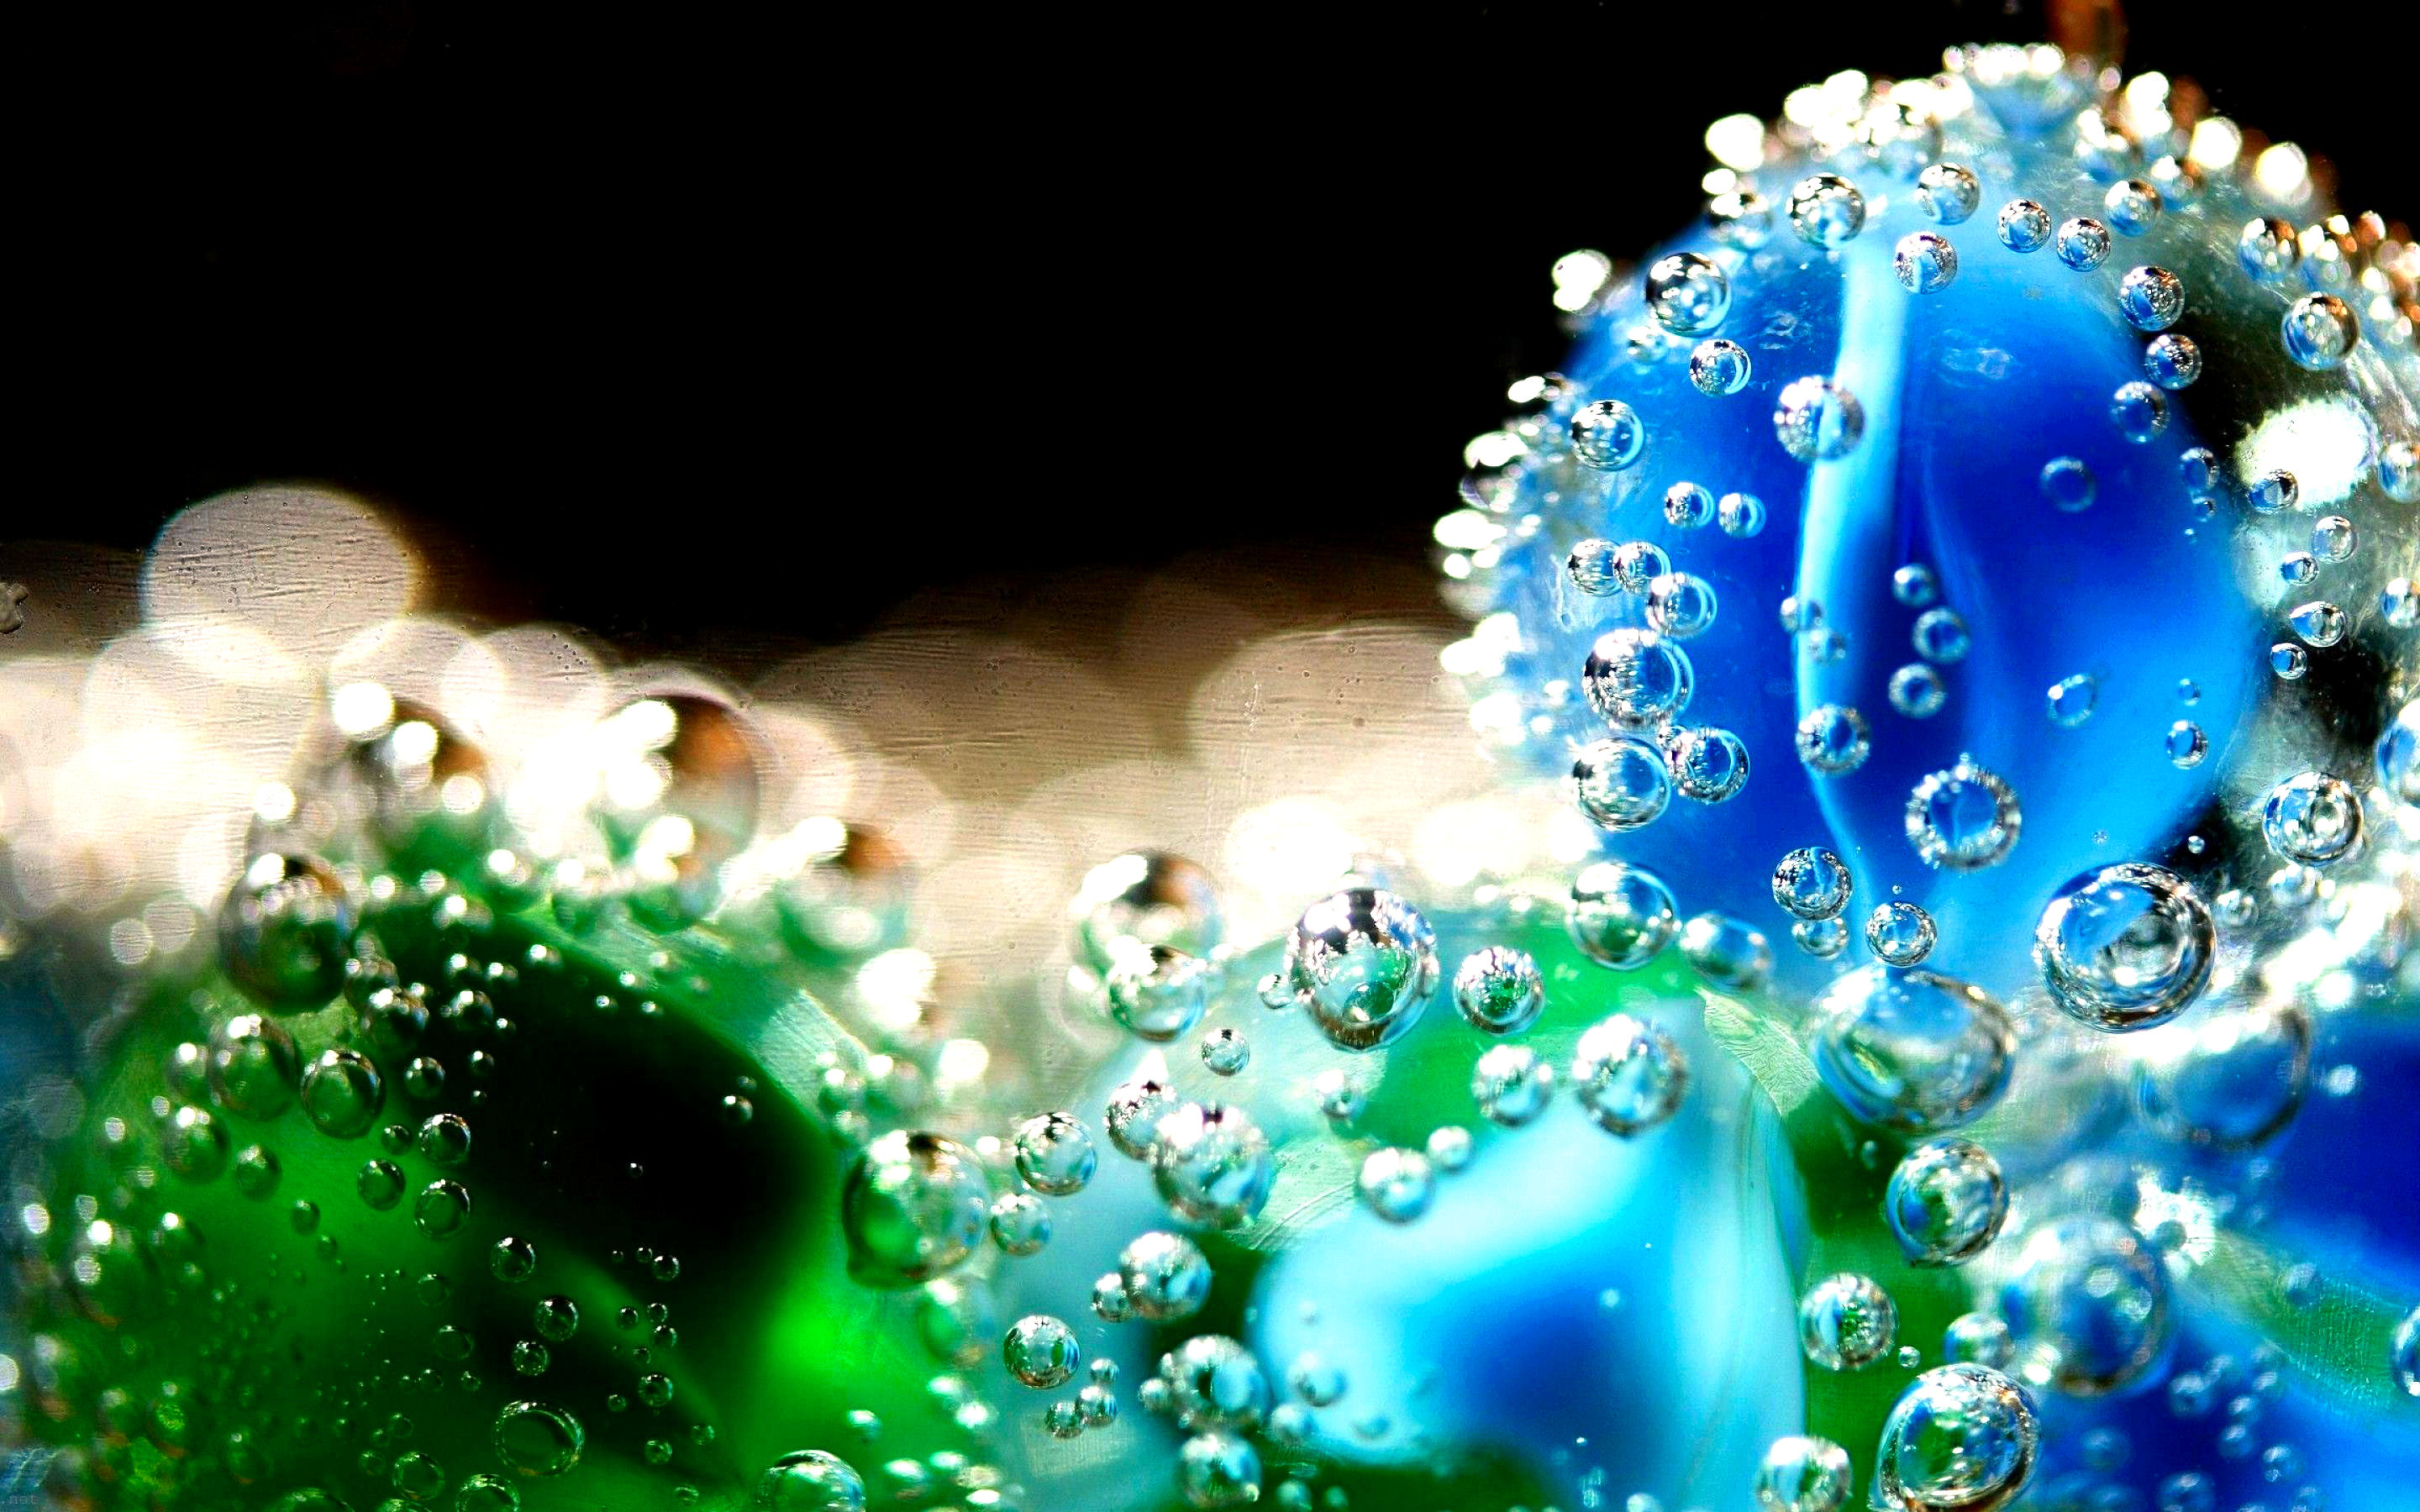 green, photography, water drop, blue, bubble, nature, water